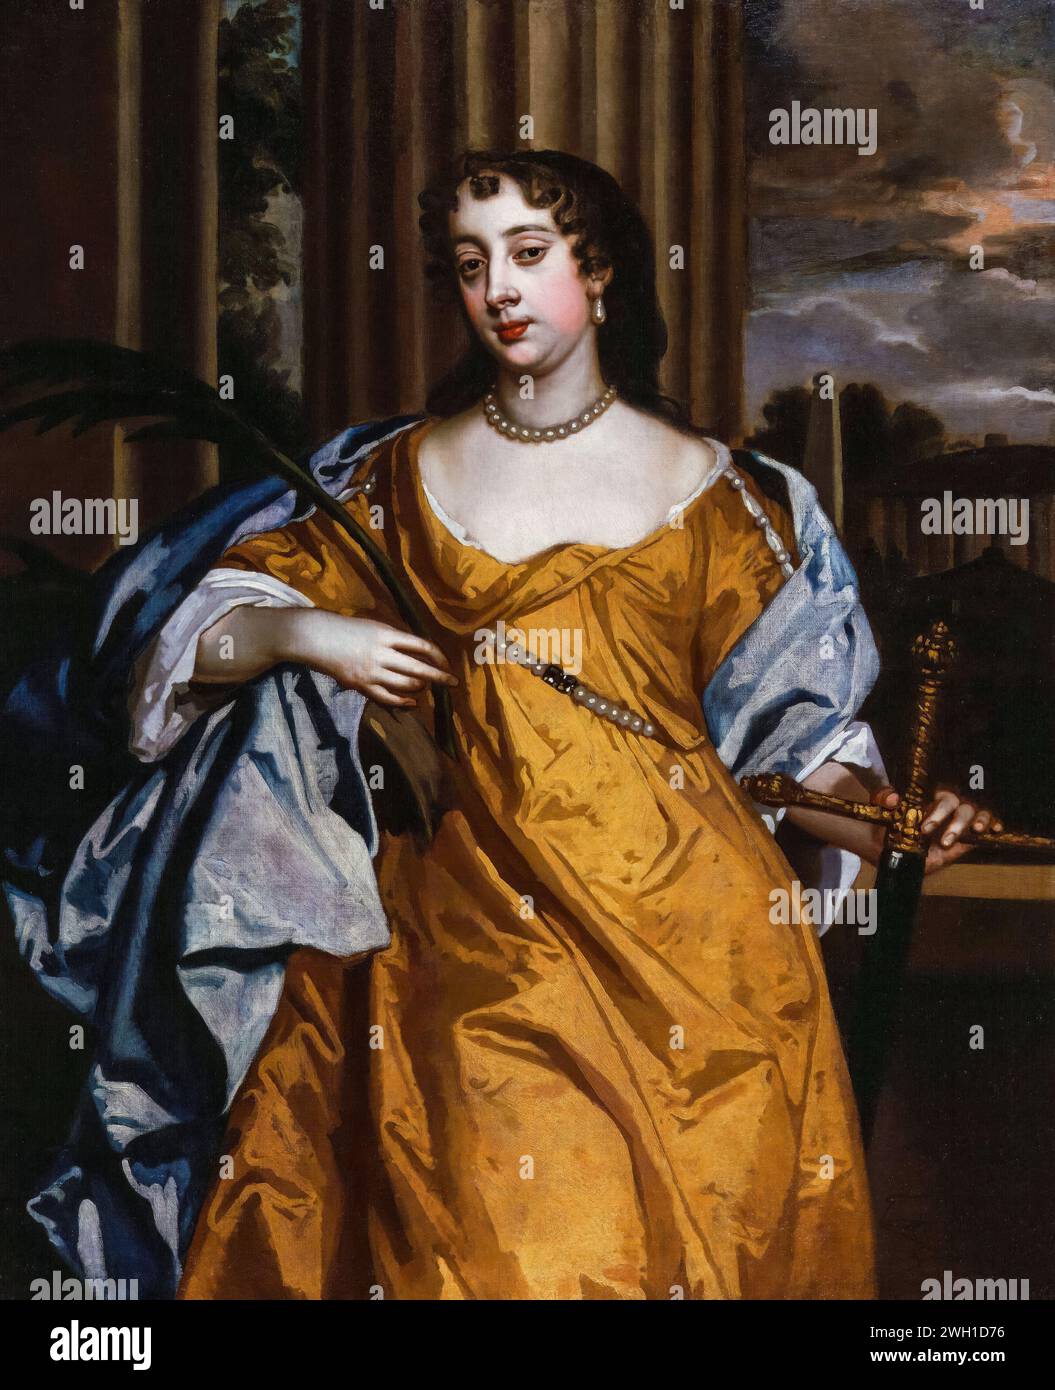 Barbara Palmer, 1st Duchess of Cleveland (née Barbara Villiers, 1640-1709), English royal mistress of King Charles II of England, portrait painting in oil on canvas after Sir Peter Lely, circa 1666 Stock Photo